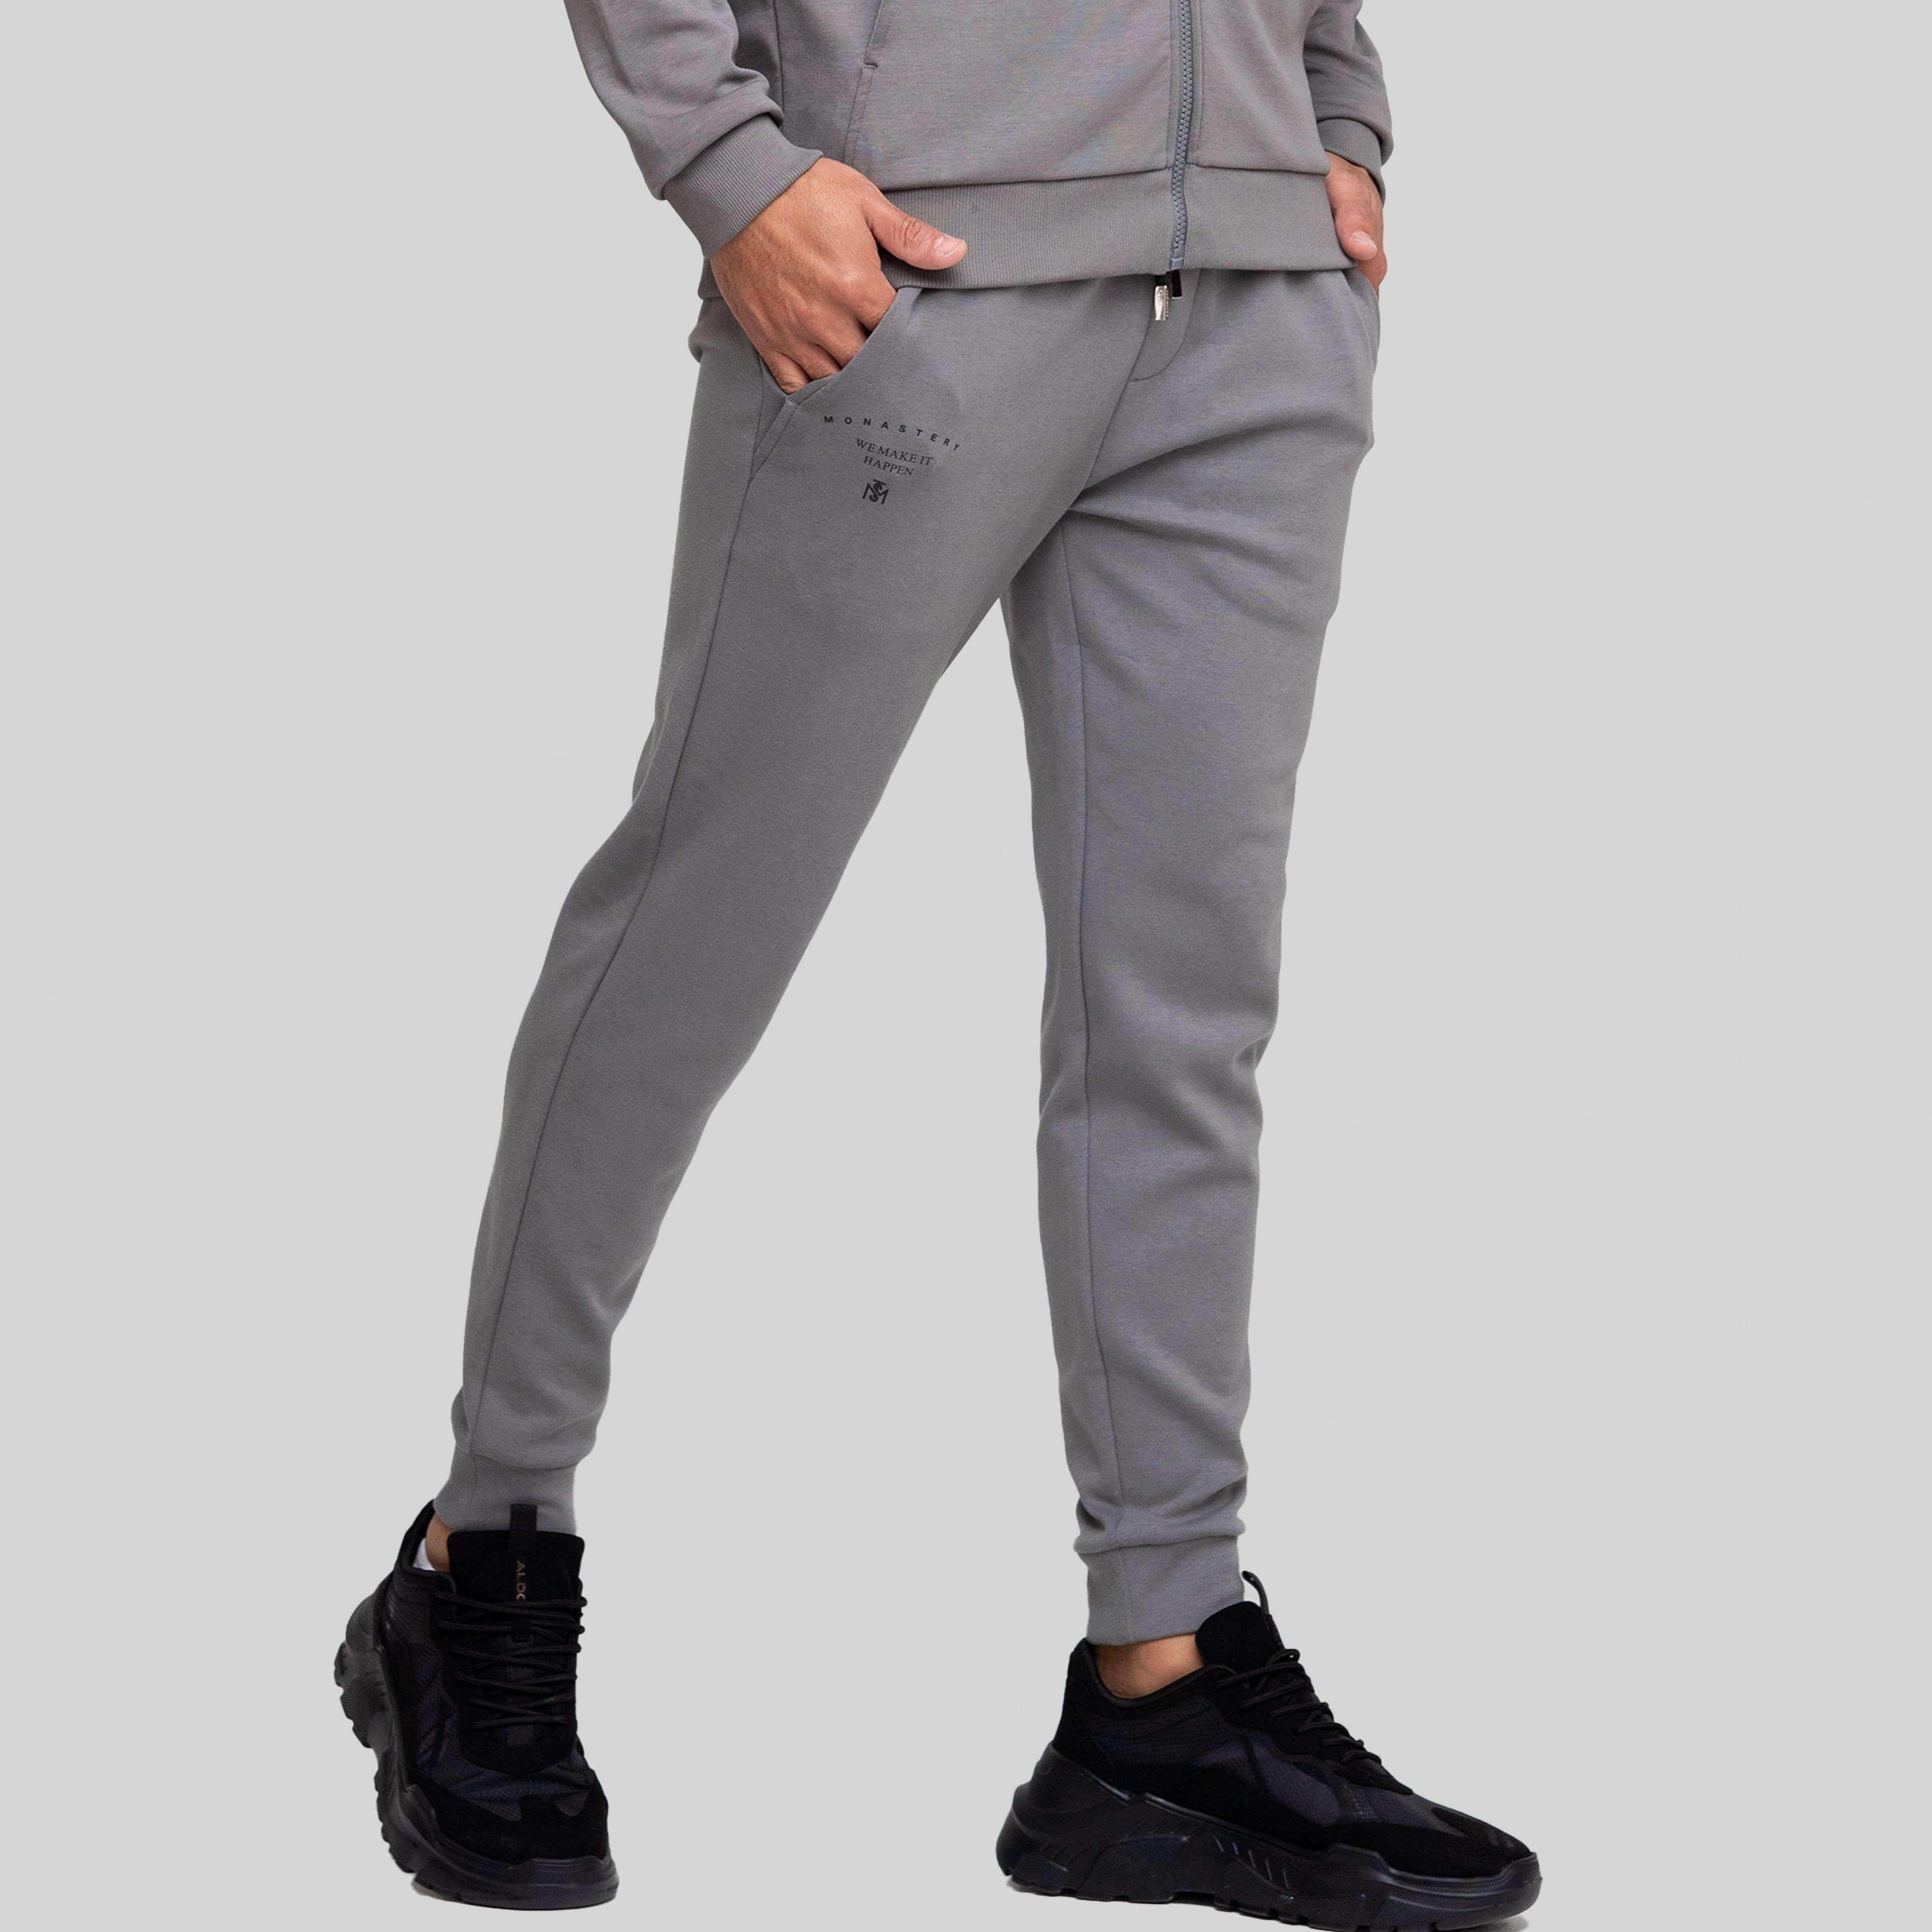 AUSTRALIS GRAY SPORT TROUSERS | Monastery Couture